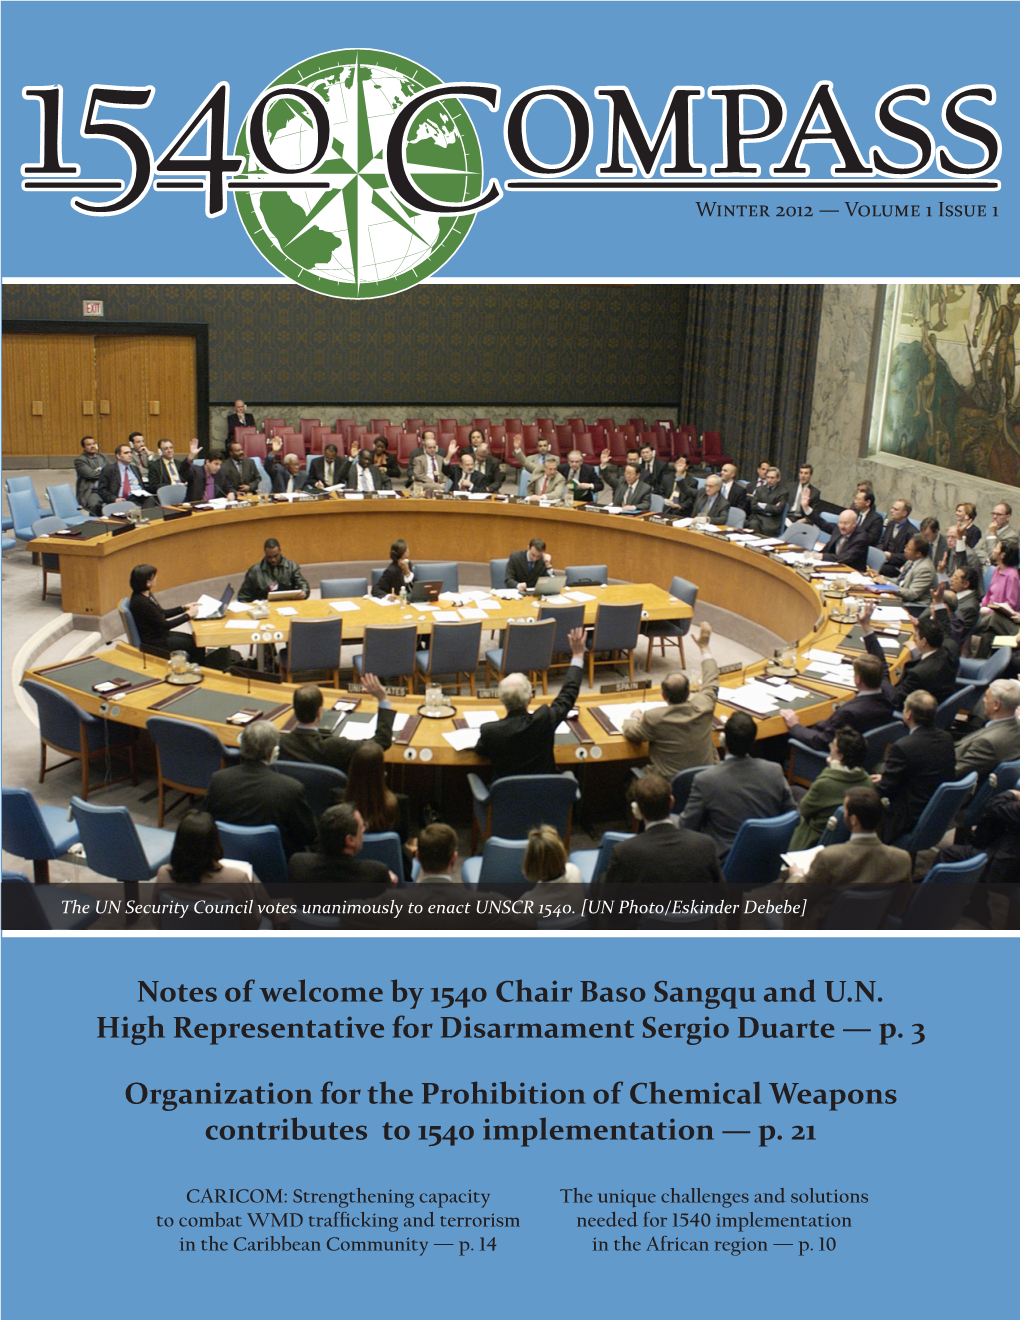 Organization for the Prohibition of Chemical Weapons Contributes to 1540 Implementation — P